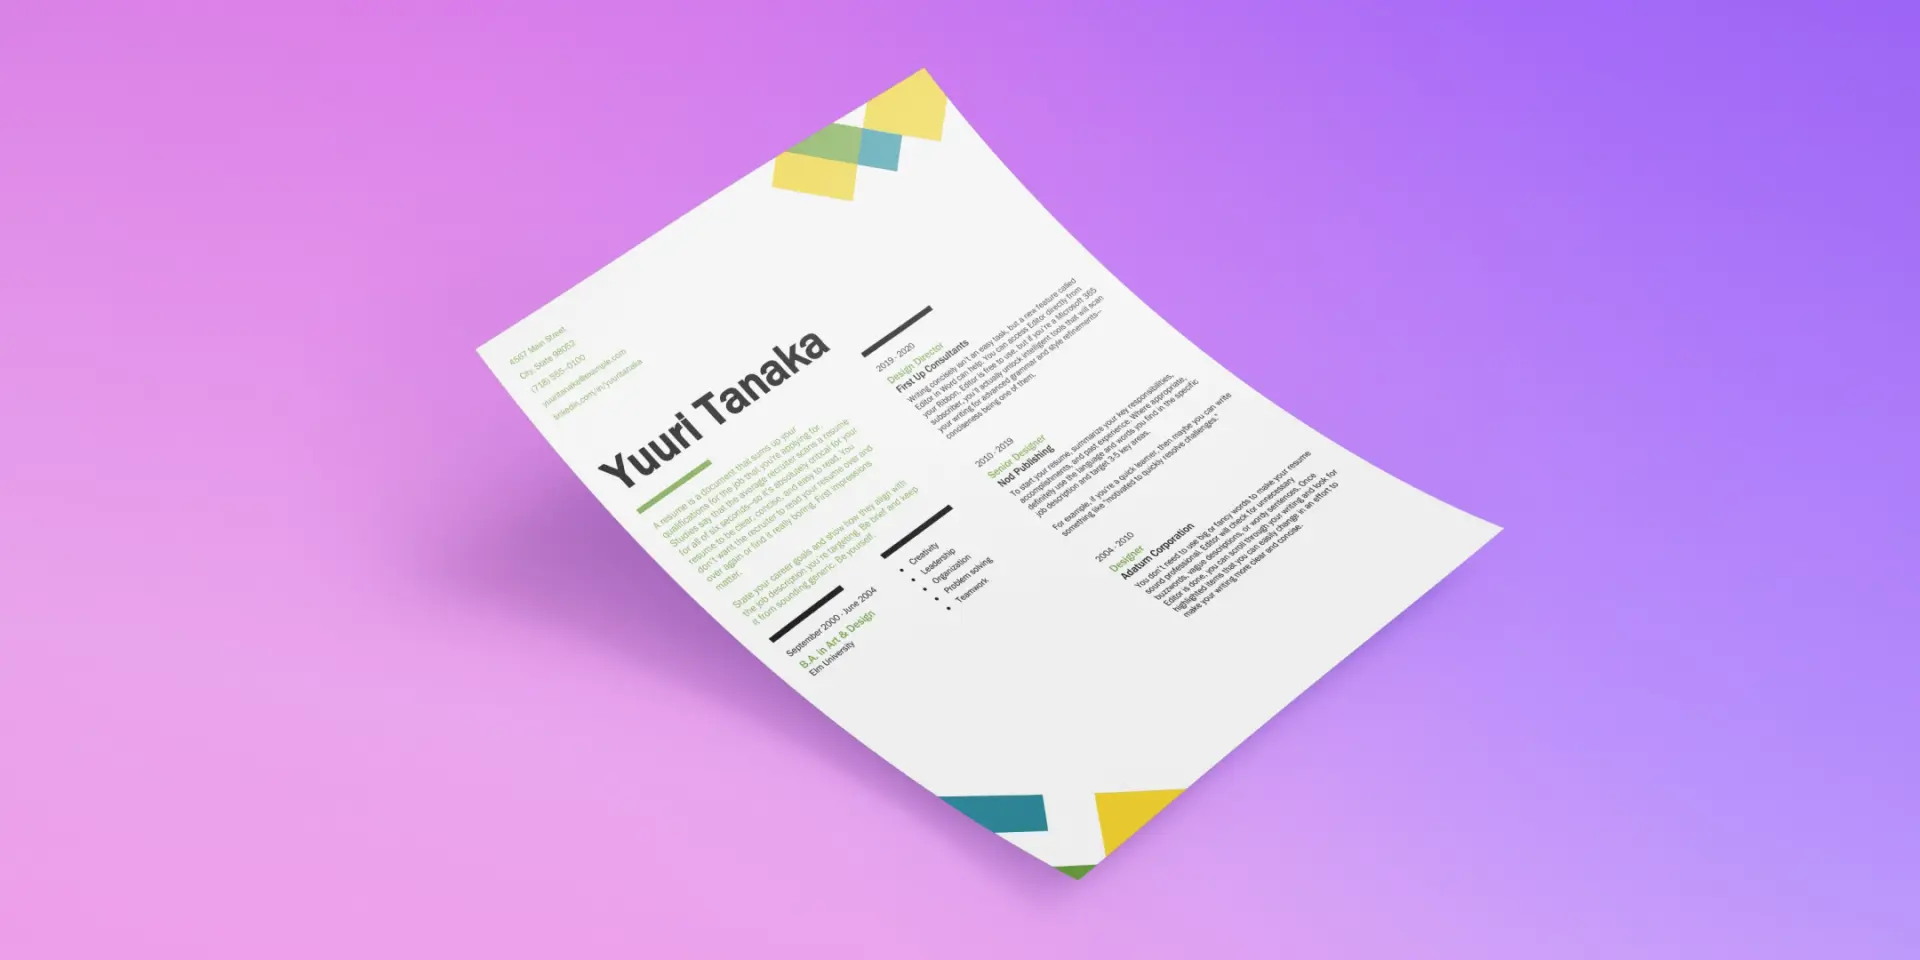 A colorful, printed resume placed on a purple background.